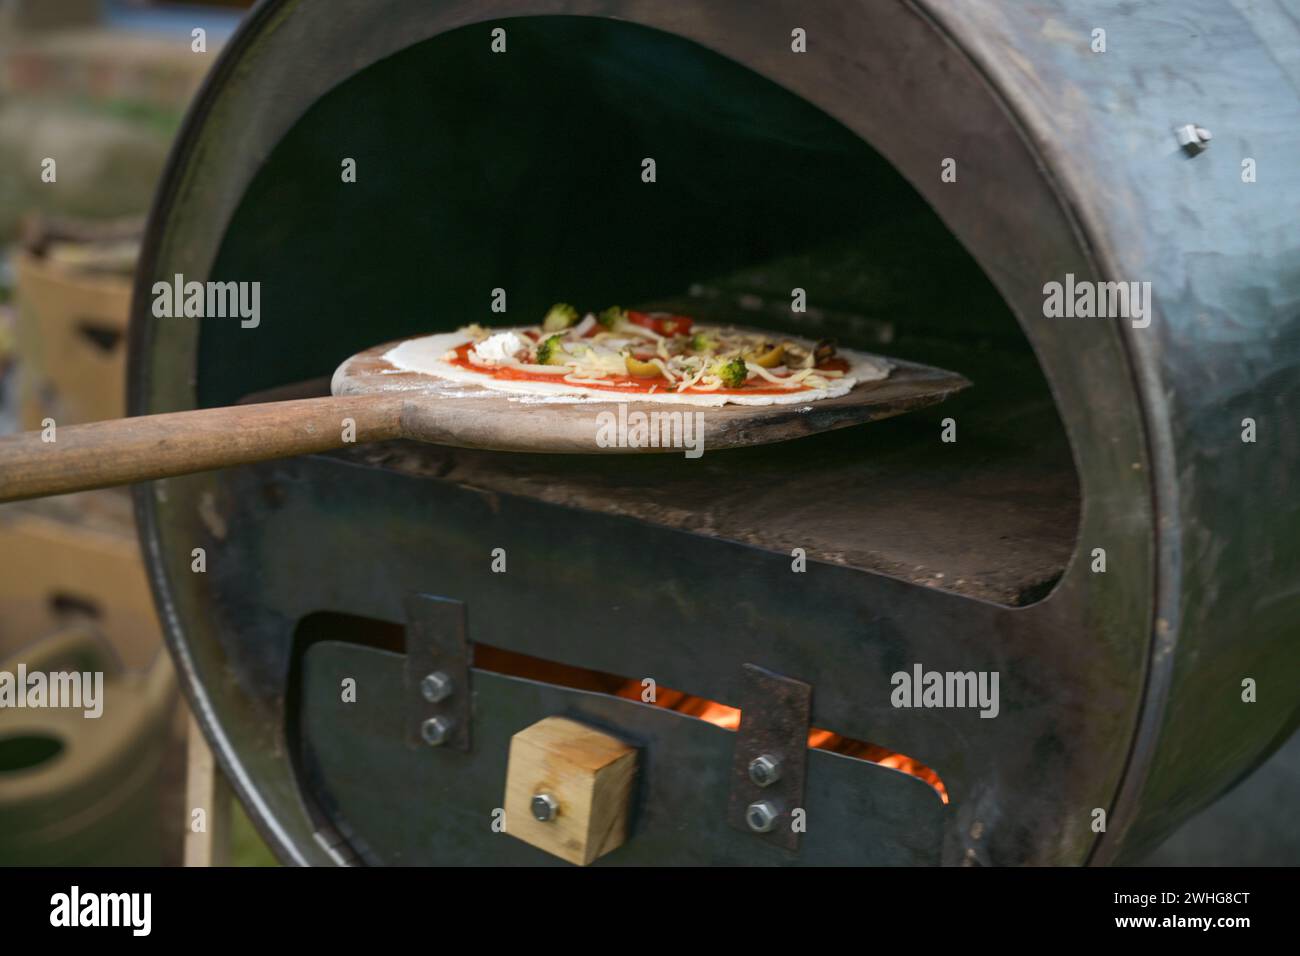 Fresh pizza on a wooden slide is pushed into a self-made recycling oven built from an old metal barrel, creative upcycling conce Stock Photo